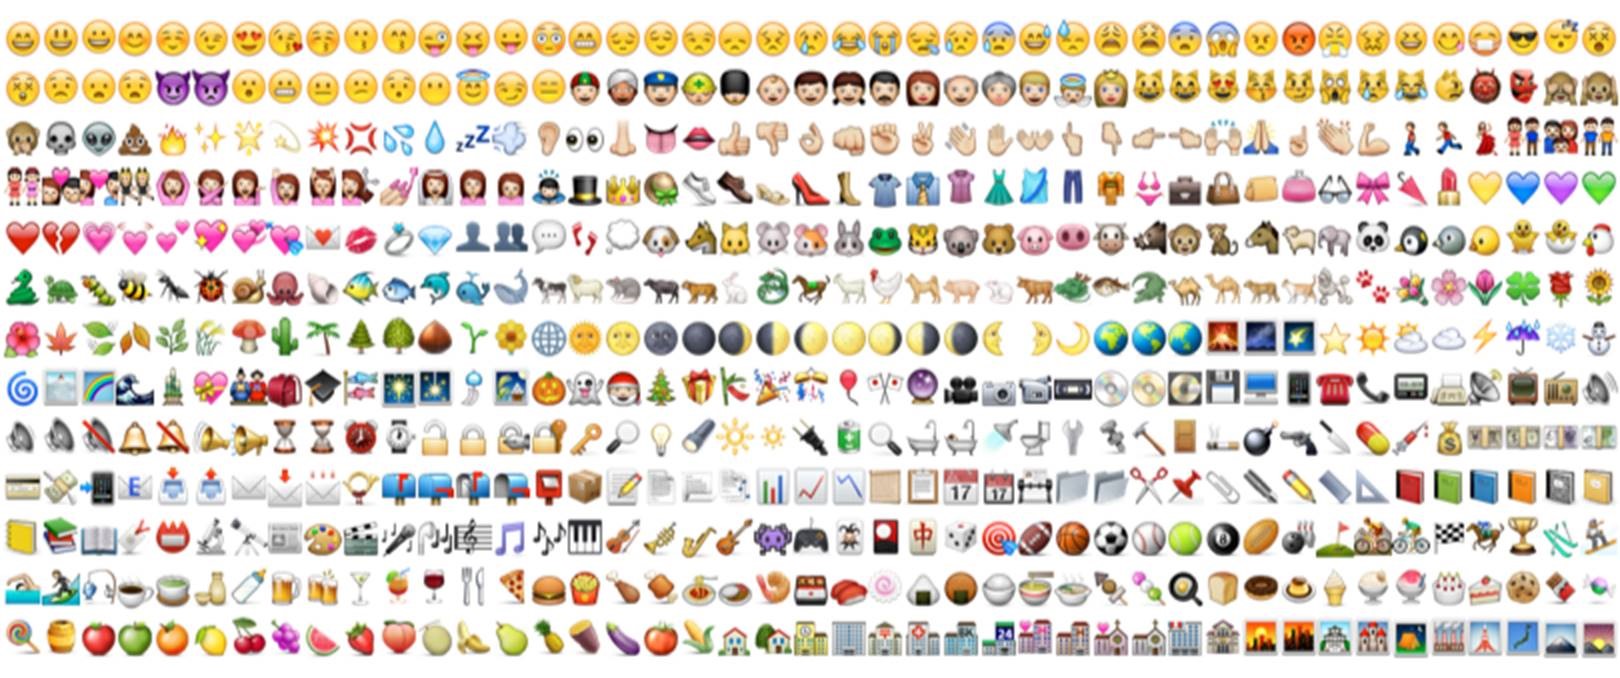 Check Out This Sampling Of Some The More Popular Emojis Below